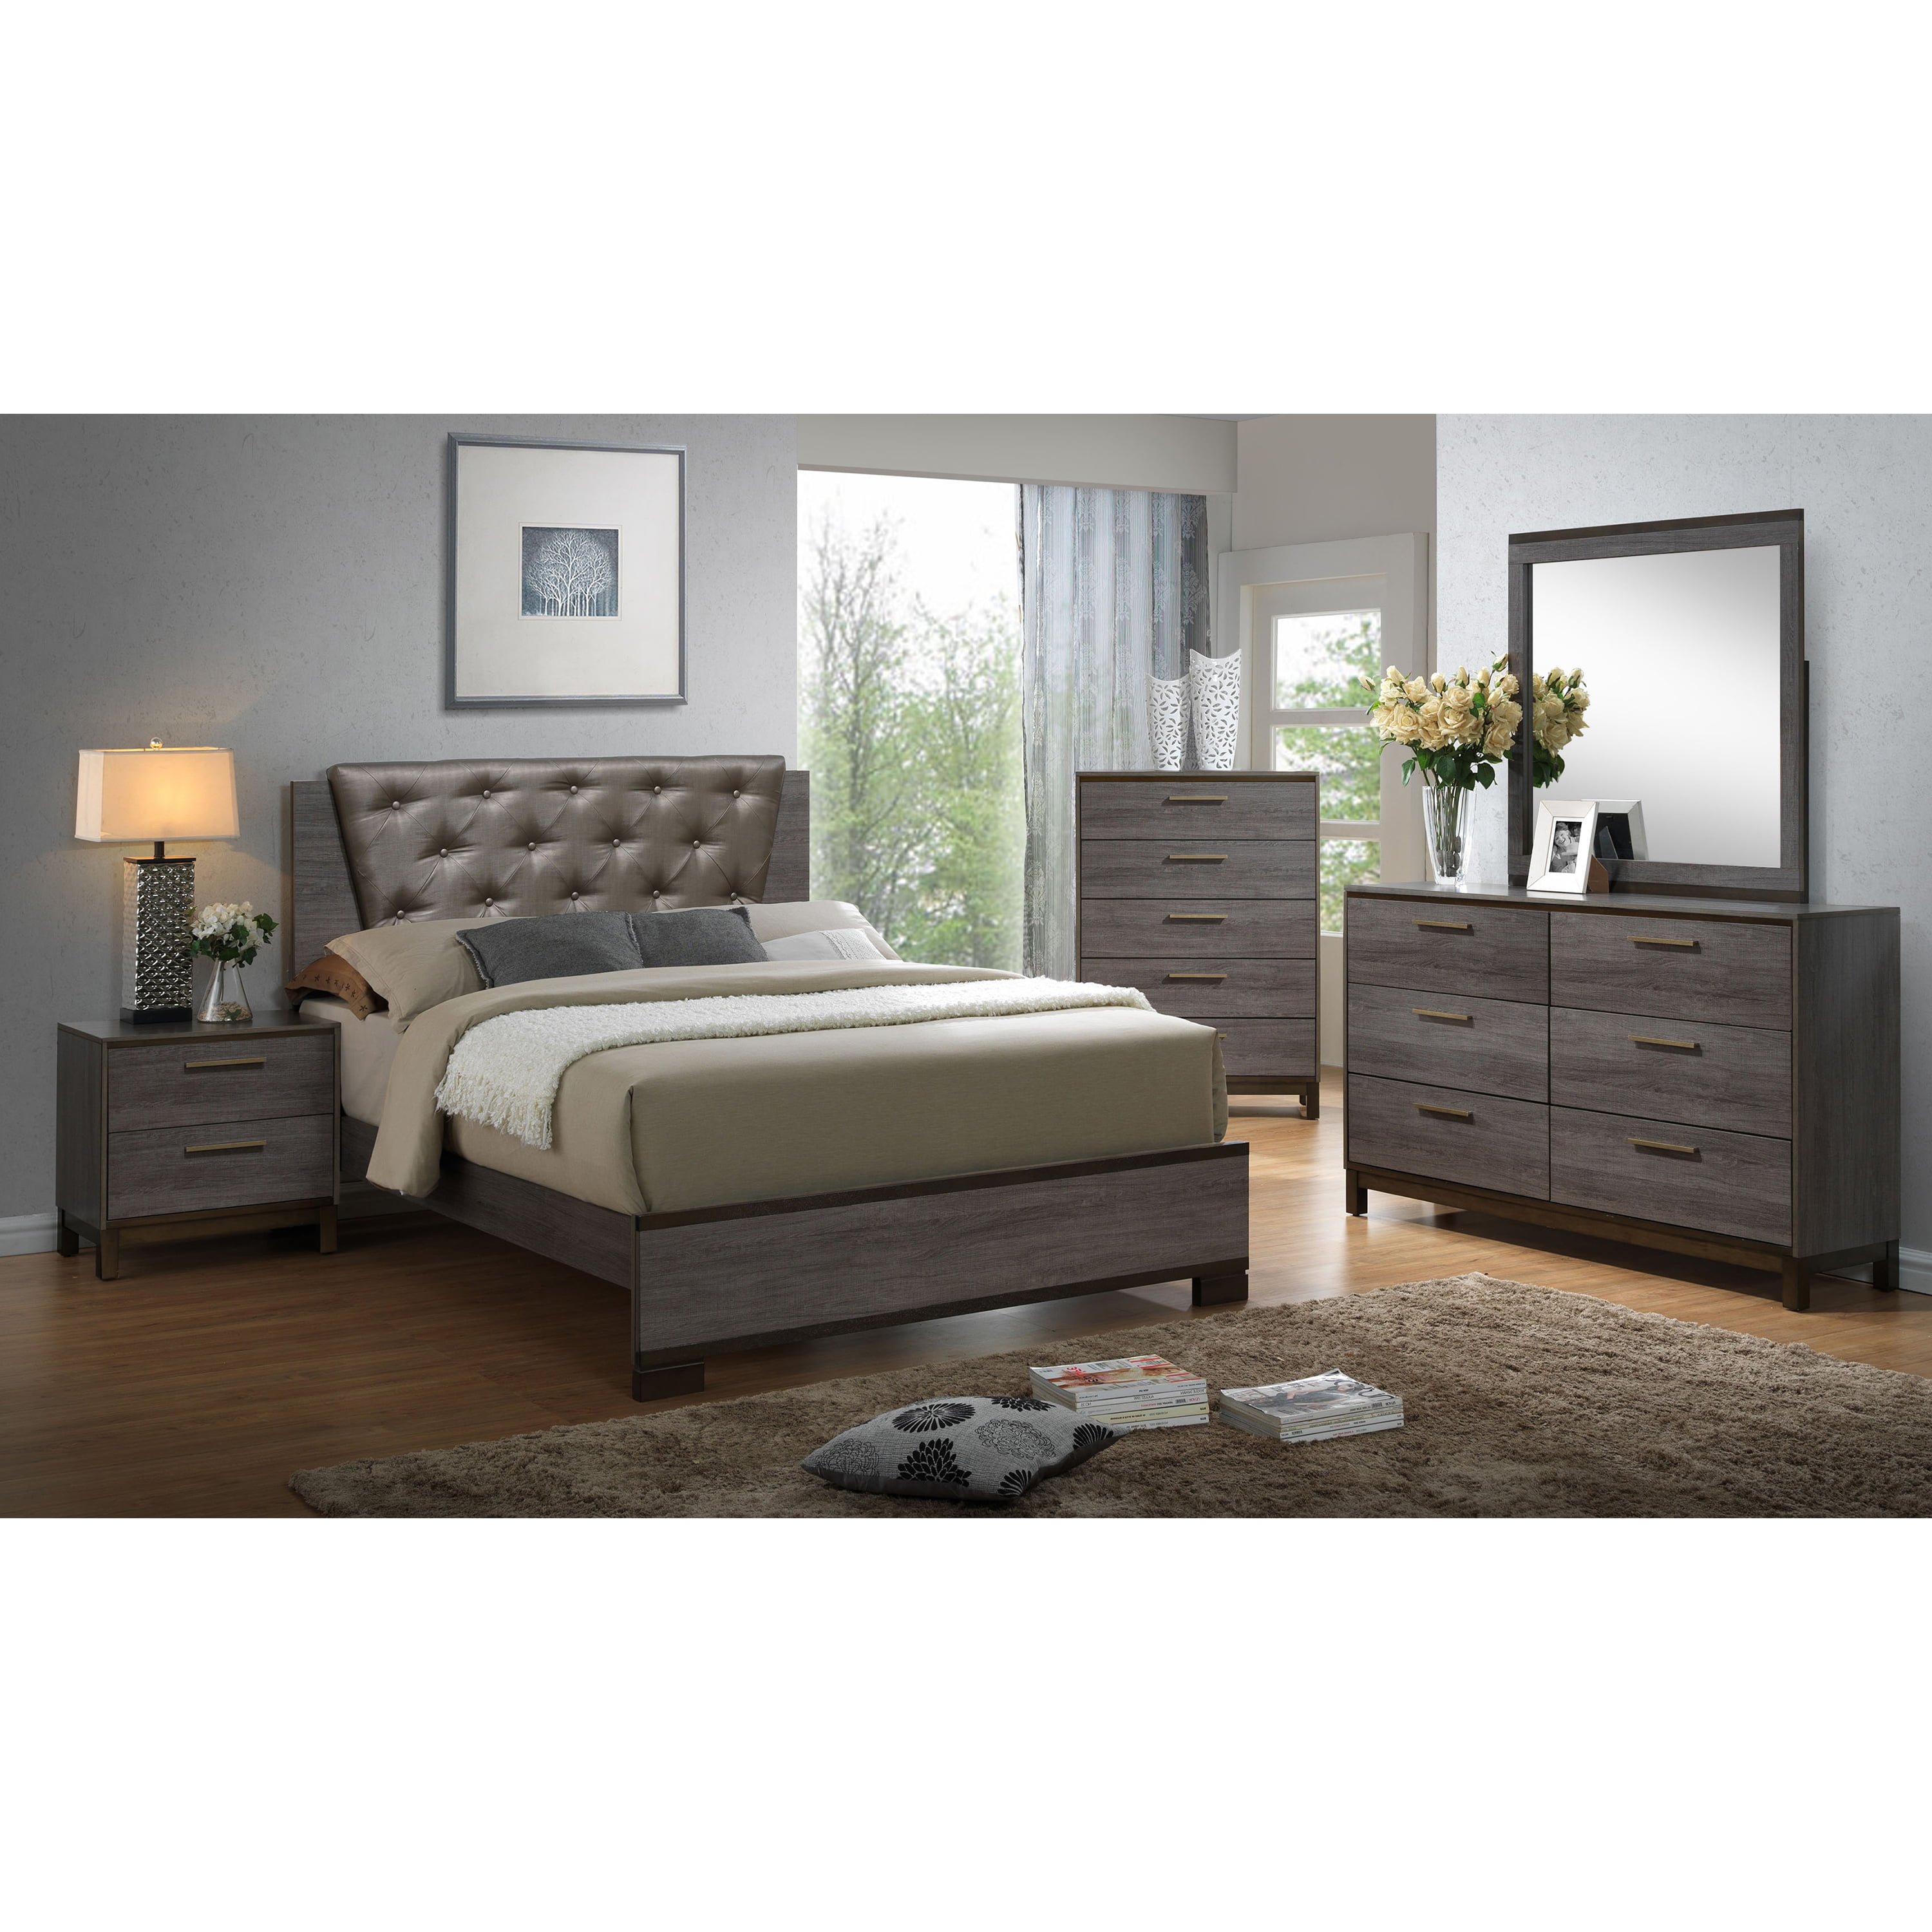 Furniture Of America Althea Bedroom Set, Althea Upholstered Sleigh Bed King